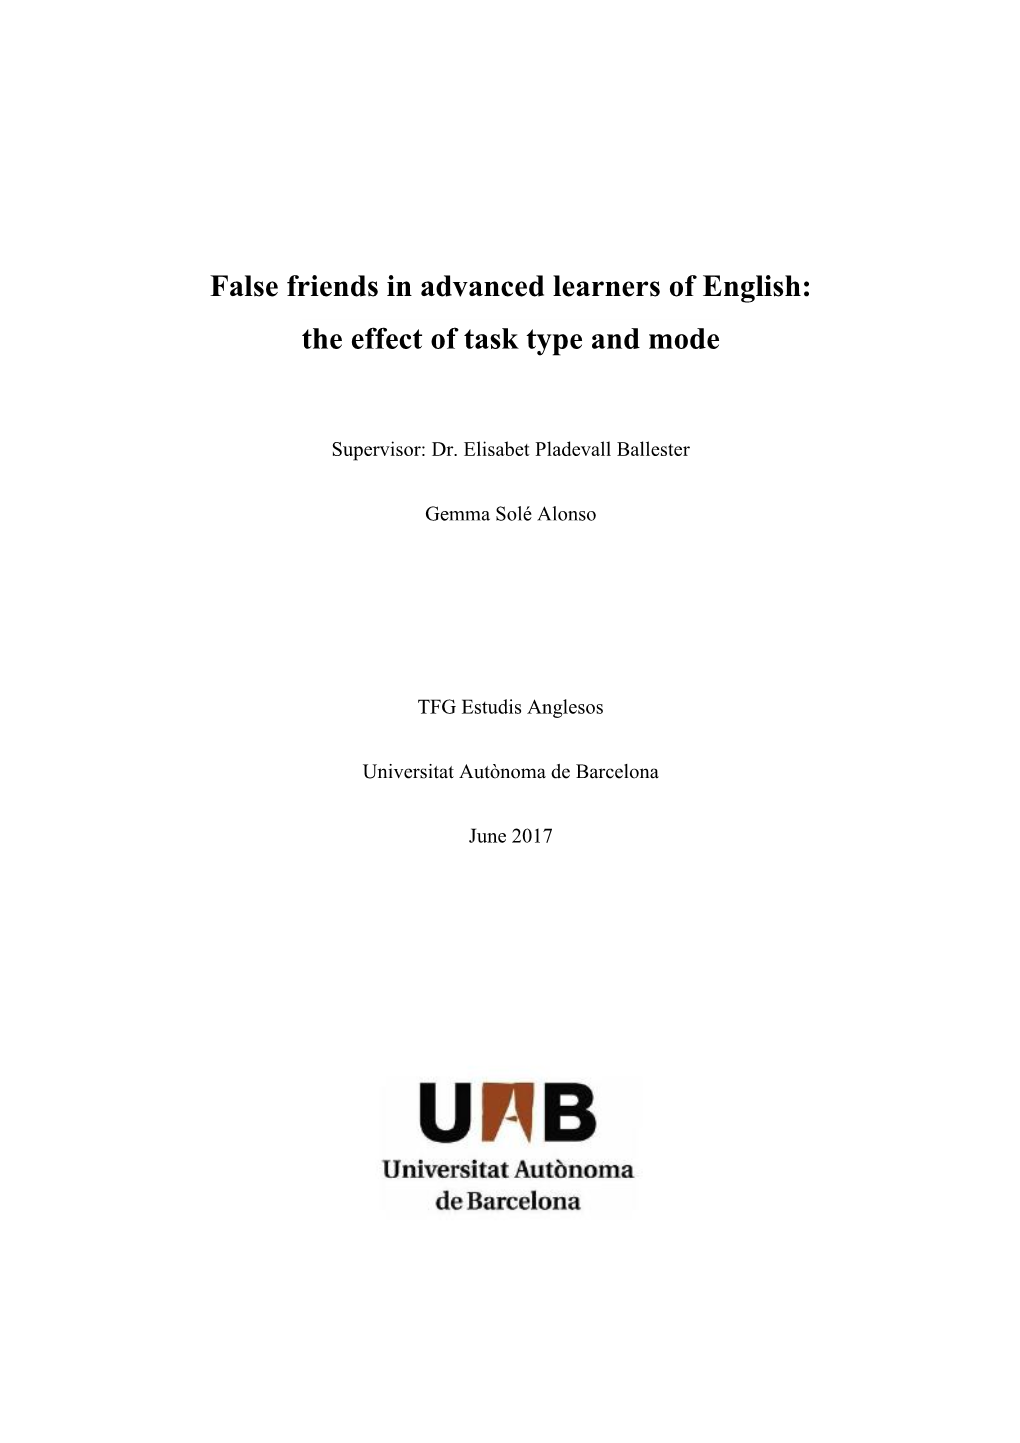 False Friends in Advanced Learners of English: the Effect of Task Type and Mode